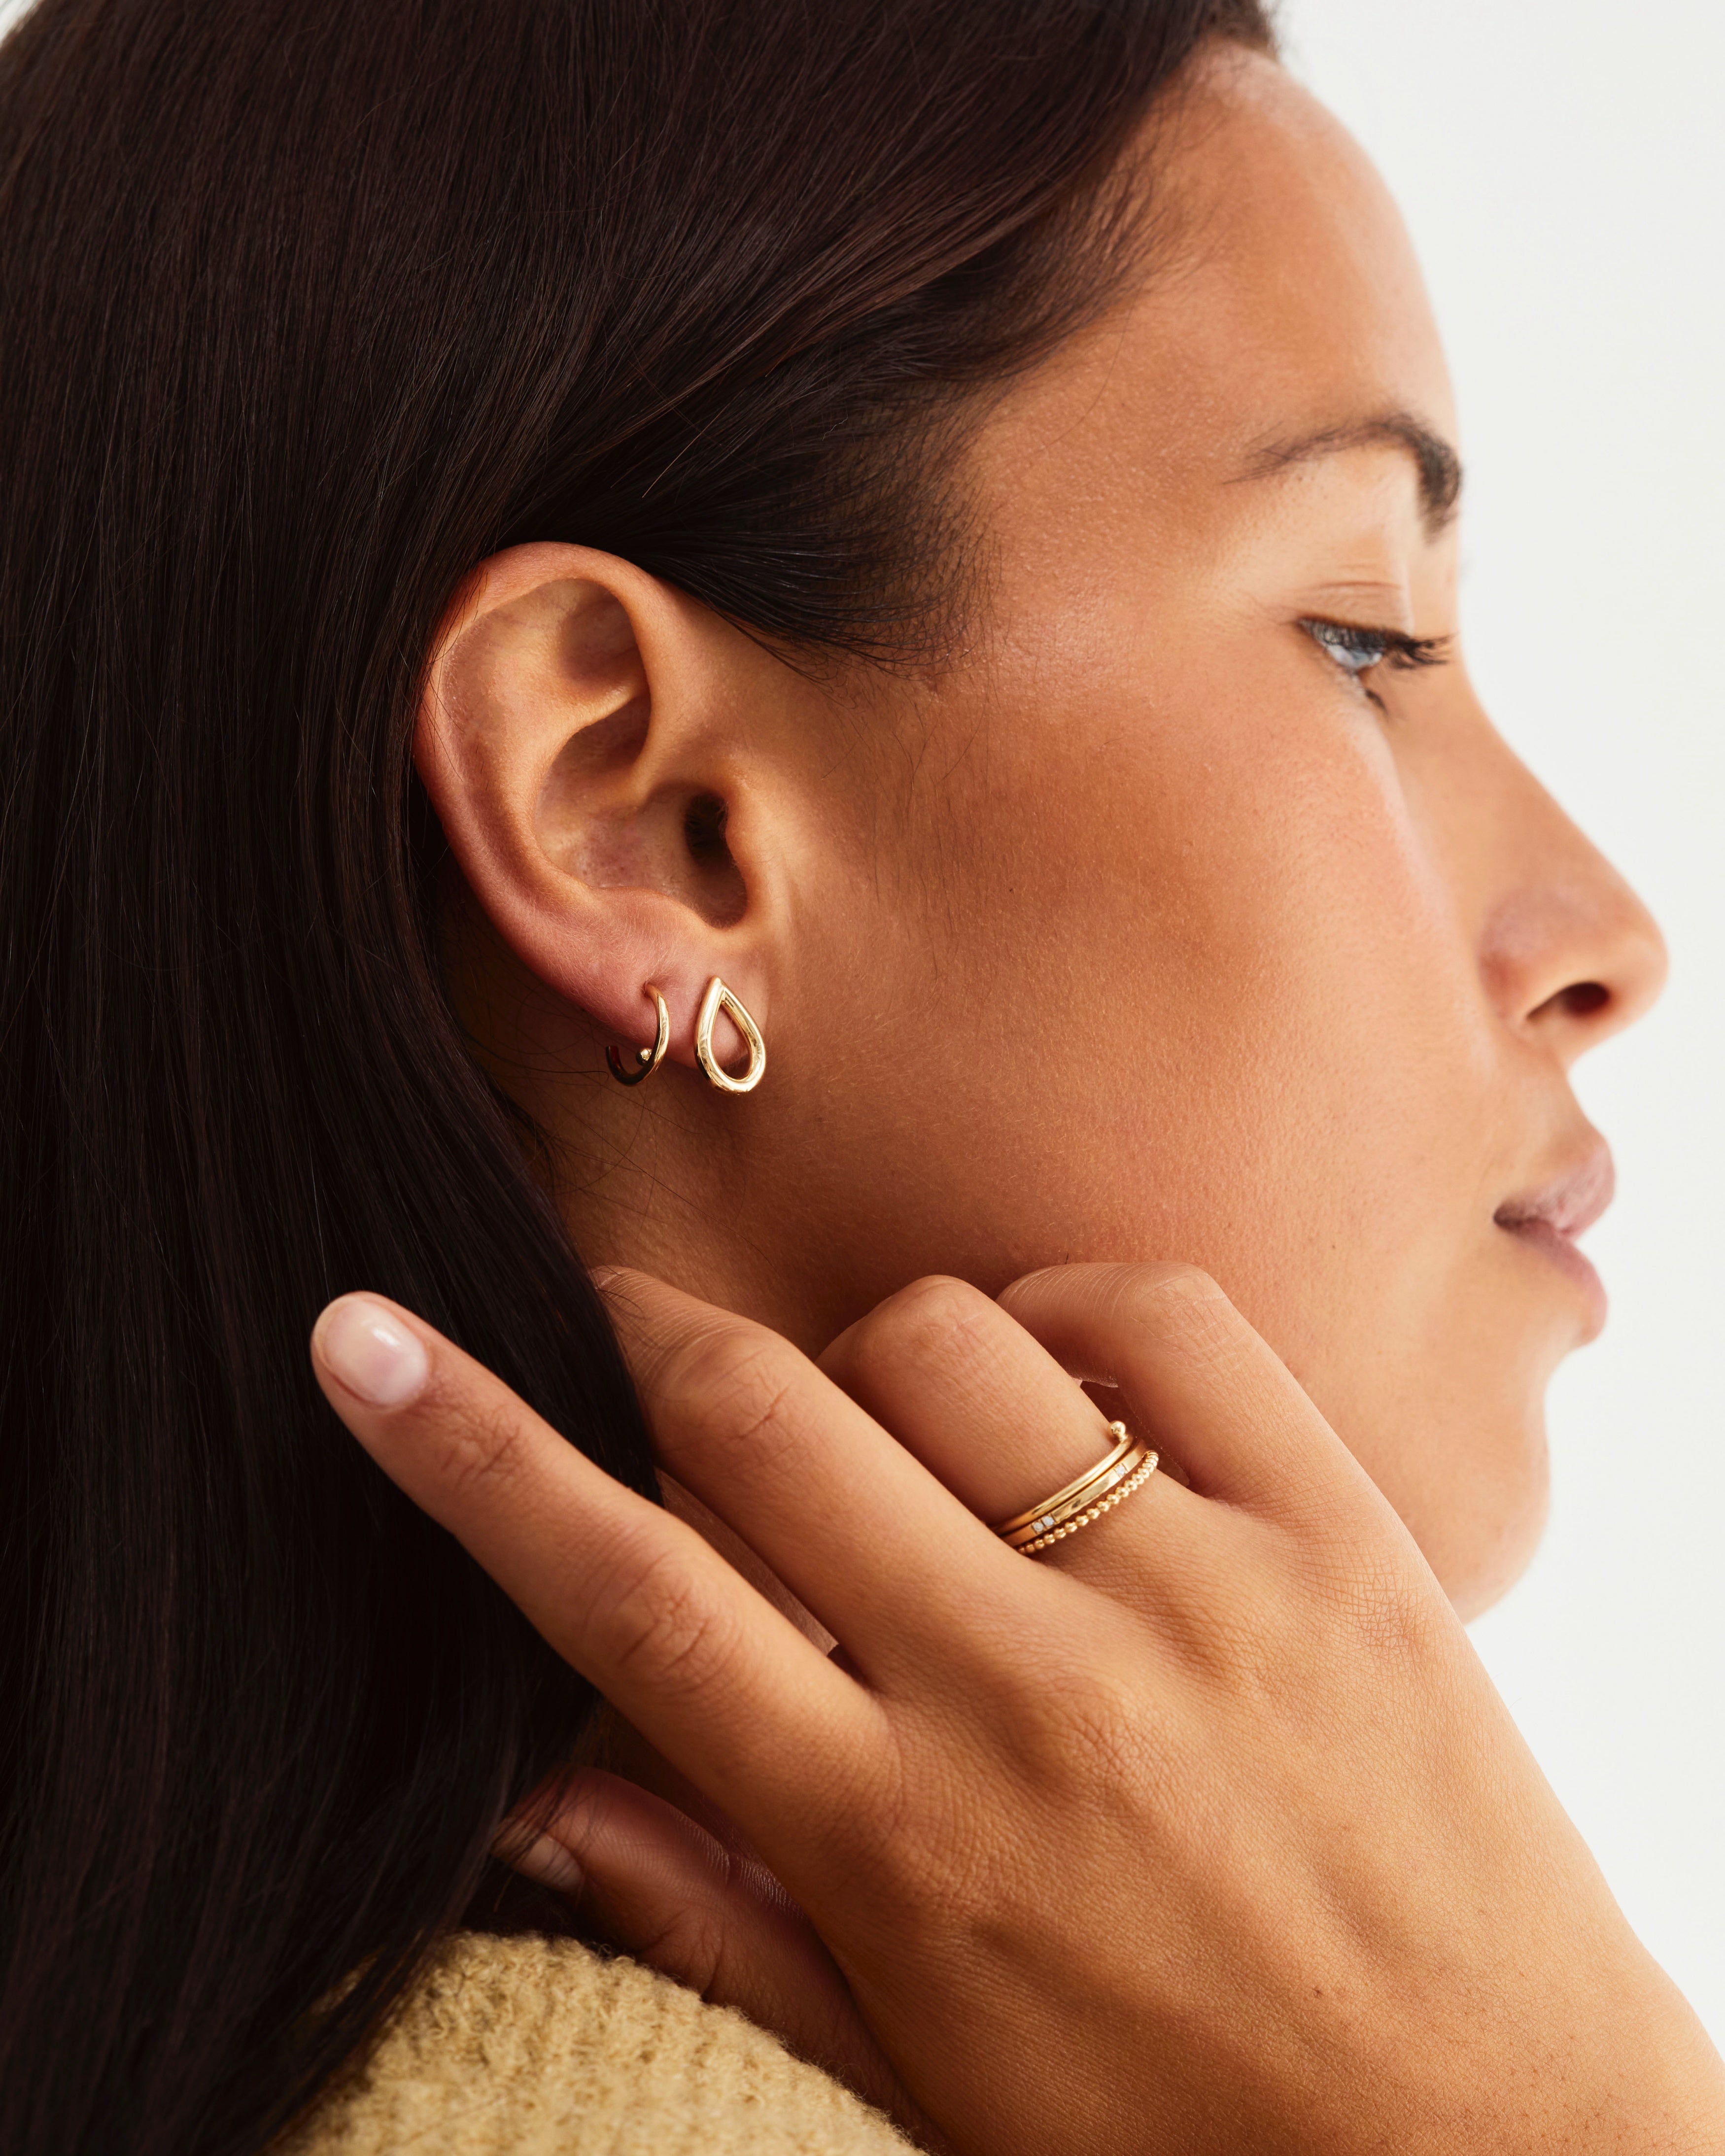 A model wearing the Small Dena Studs and Balance Hoops, both in yellow gold.